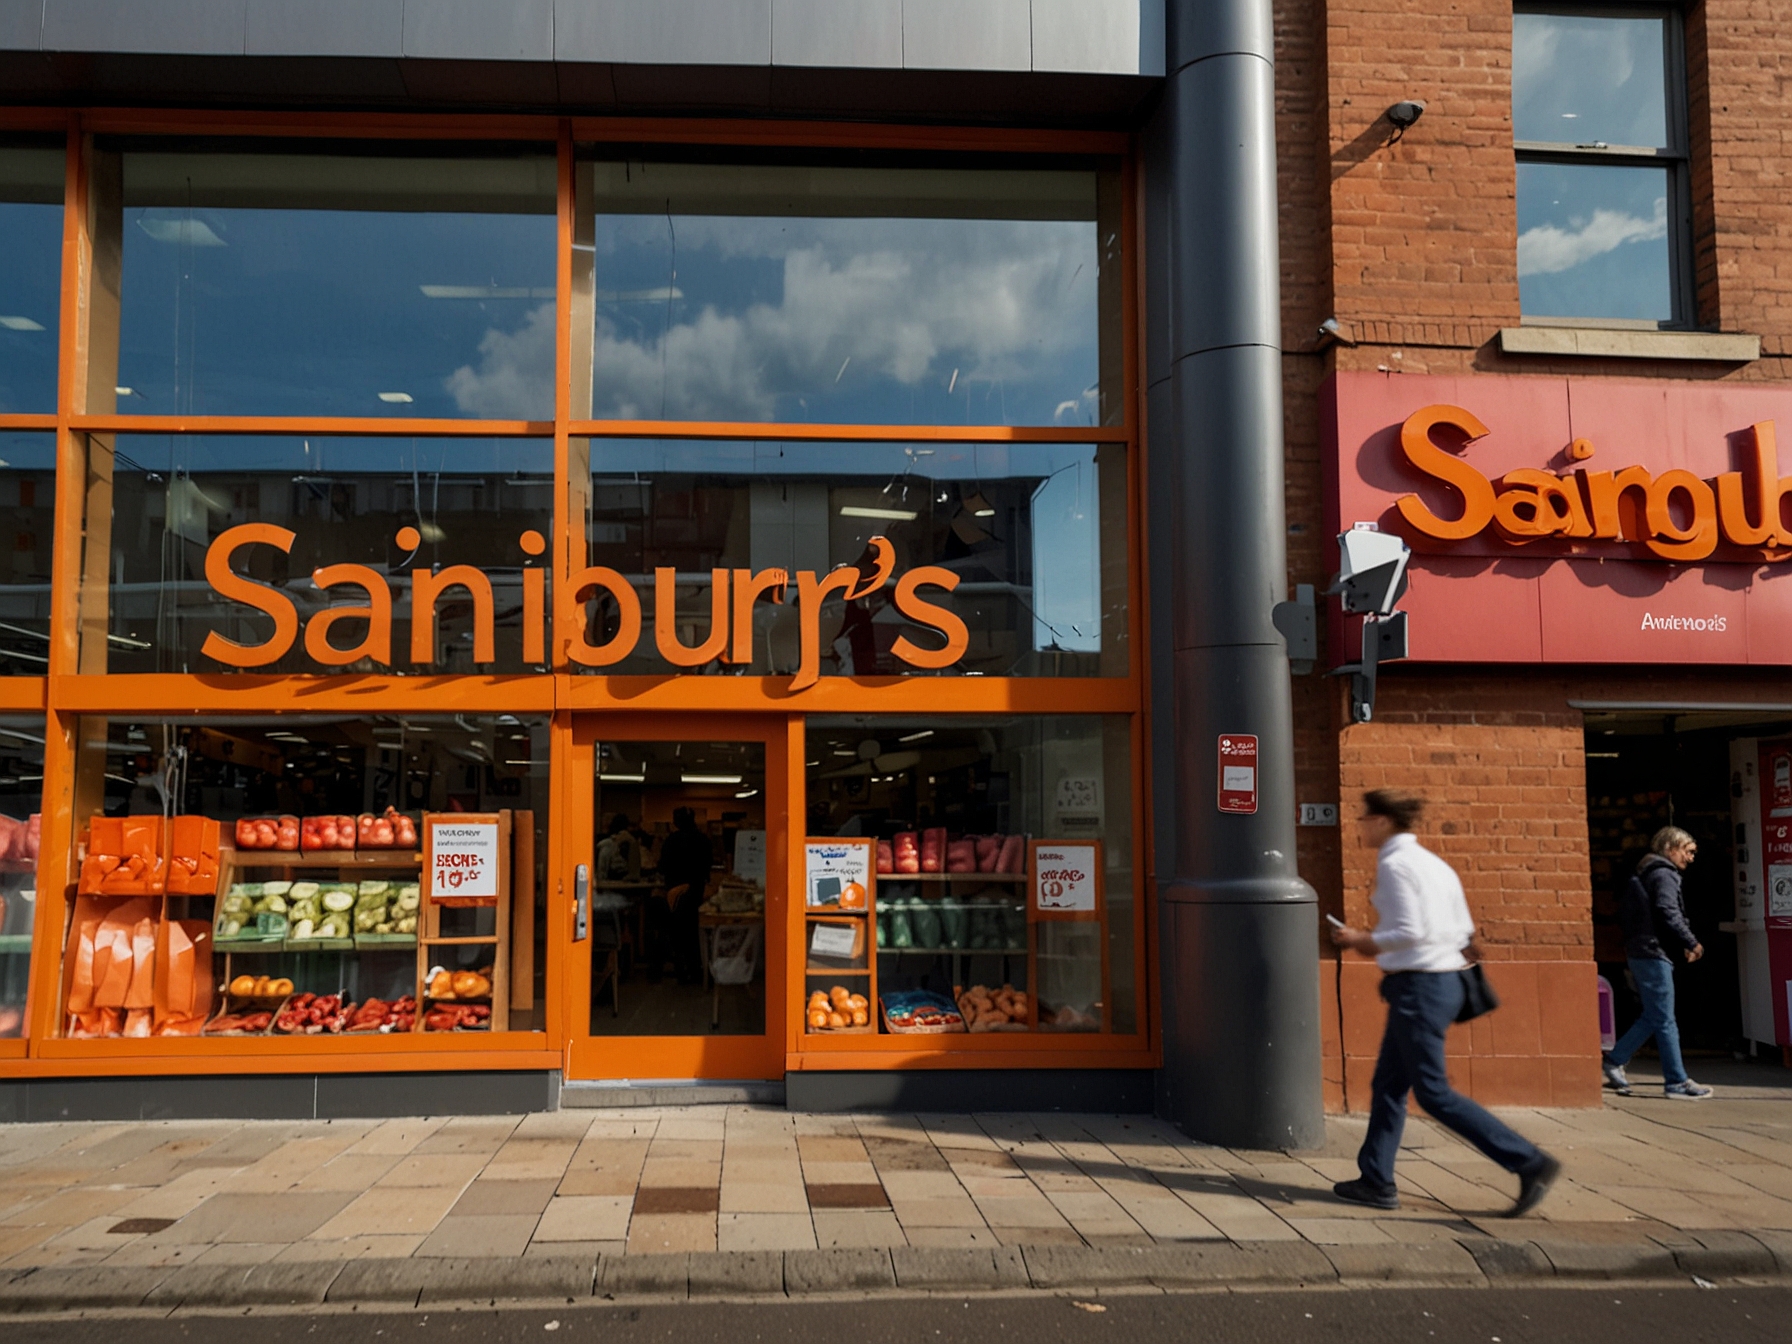 An image of the Sainsbury's logo prominently displayed on the facade of one of its grocery stores, symbolizing its renewed focus on the core retail business after the banking arm sale.